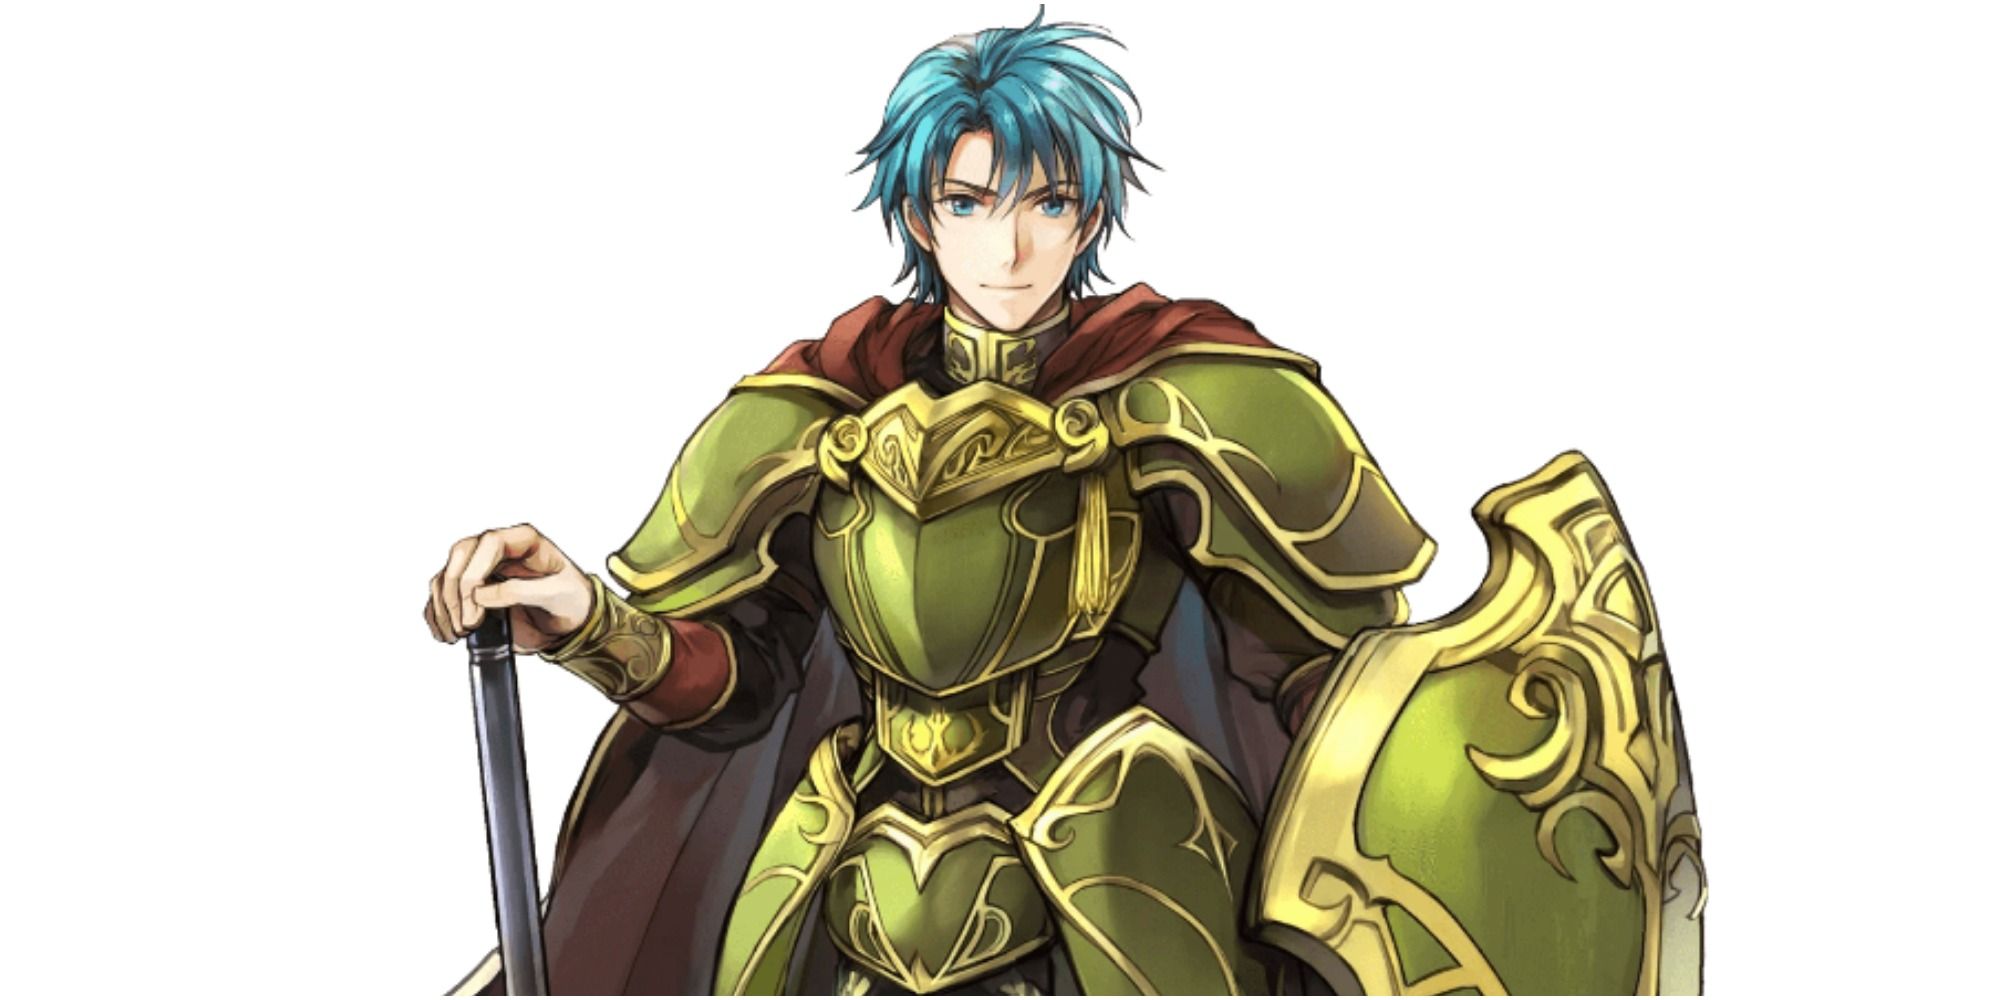 Ranked: The Top Ten Most Useful Lords in Fire Emblem